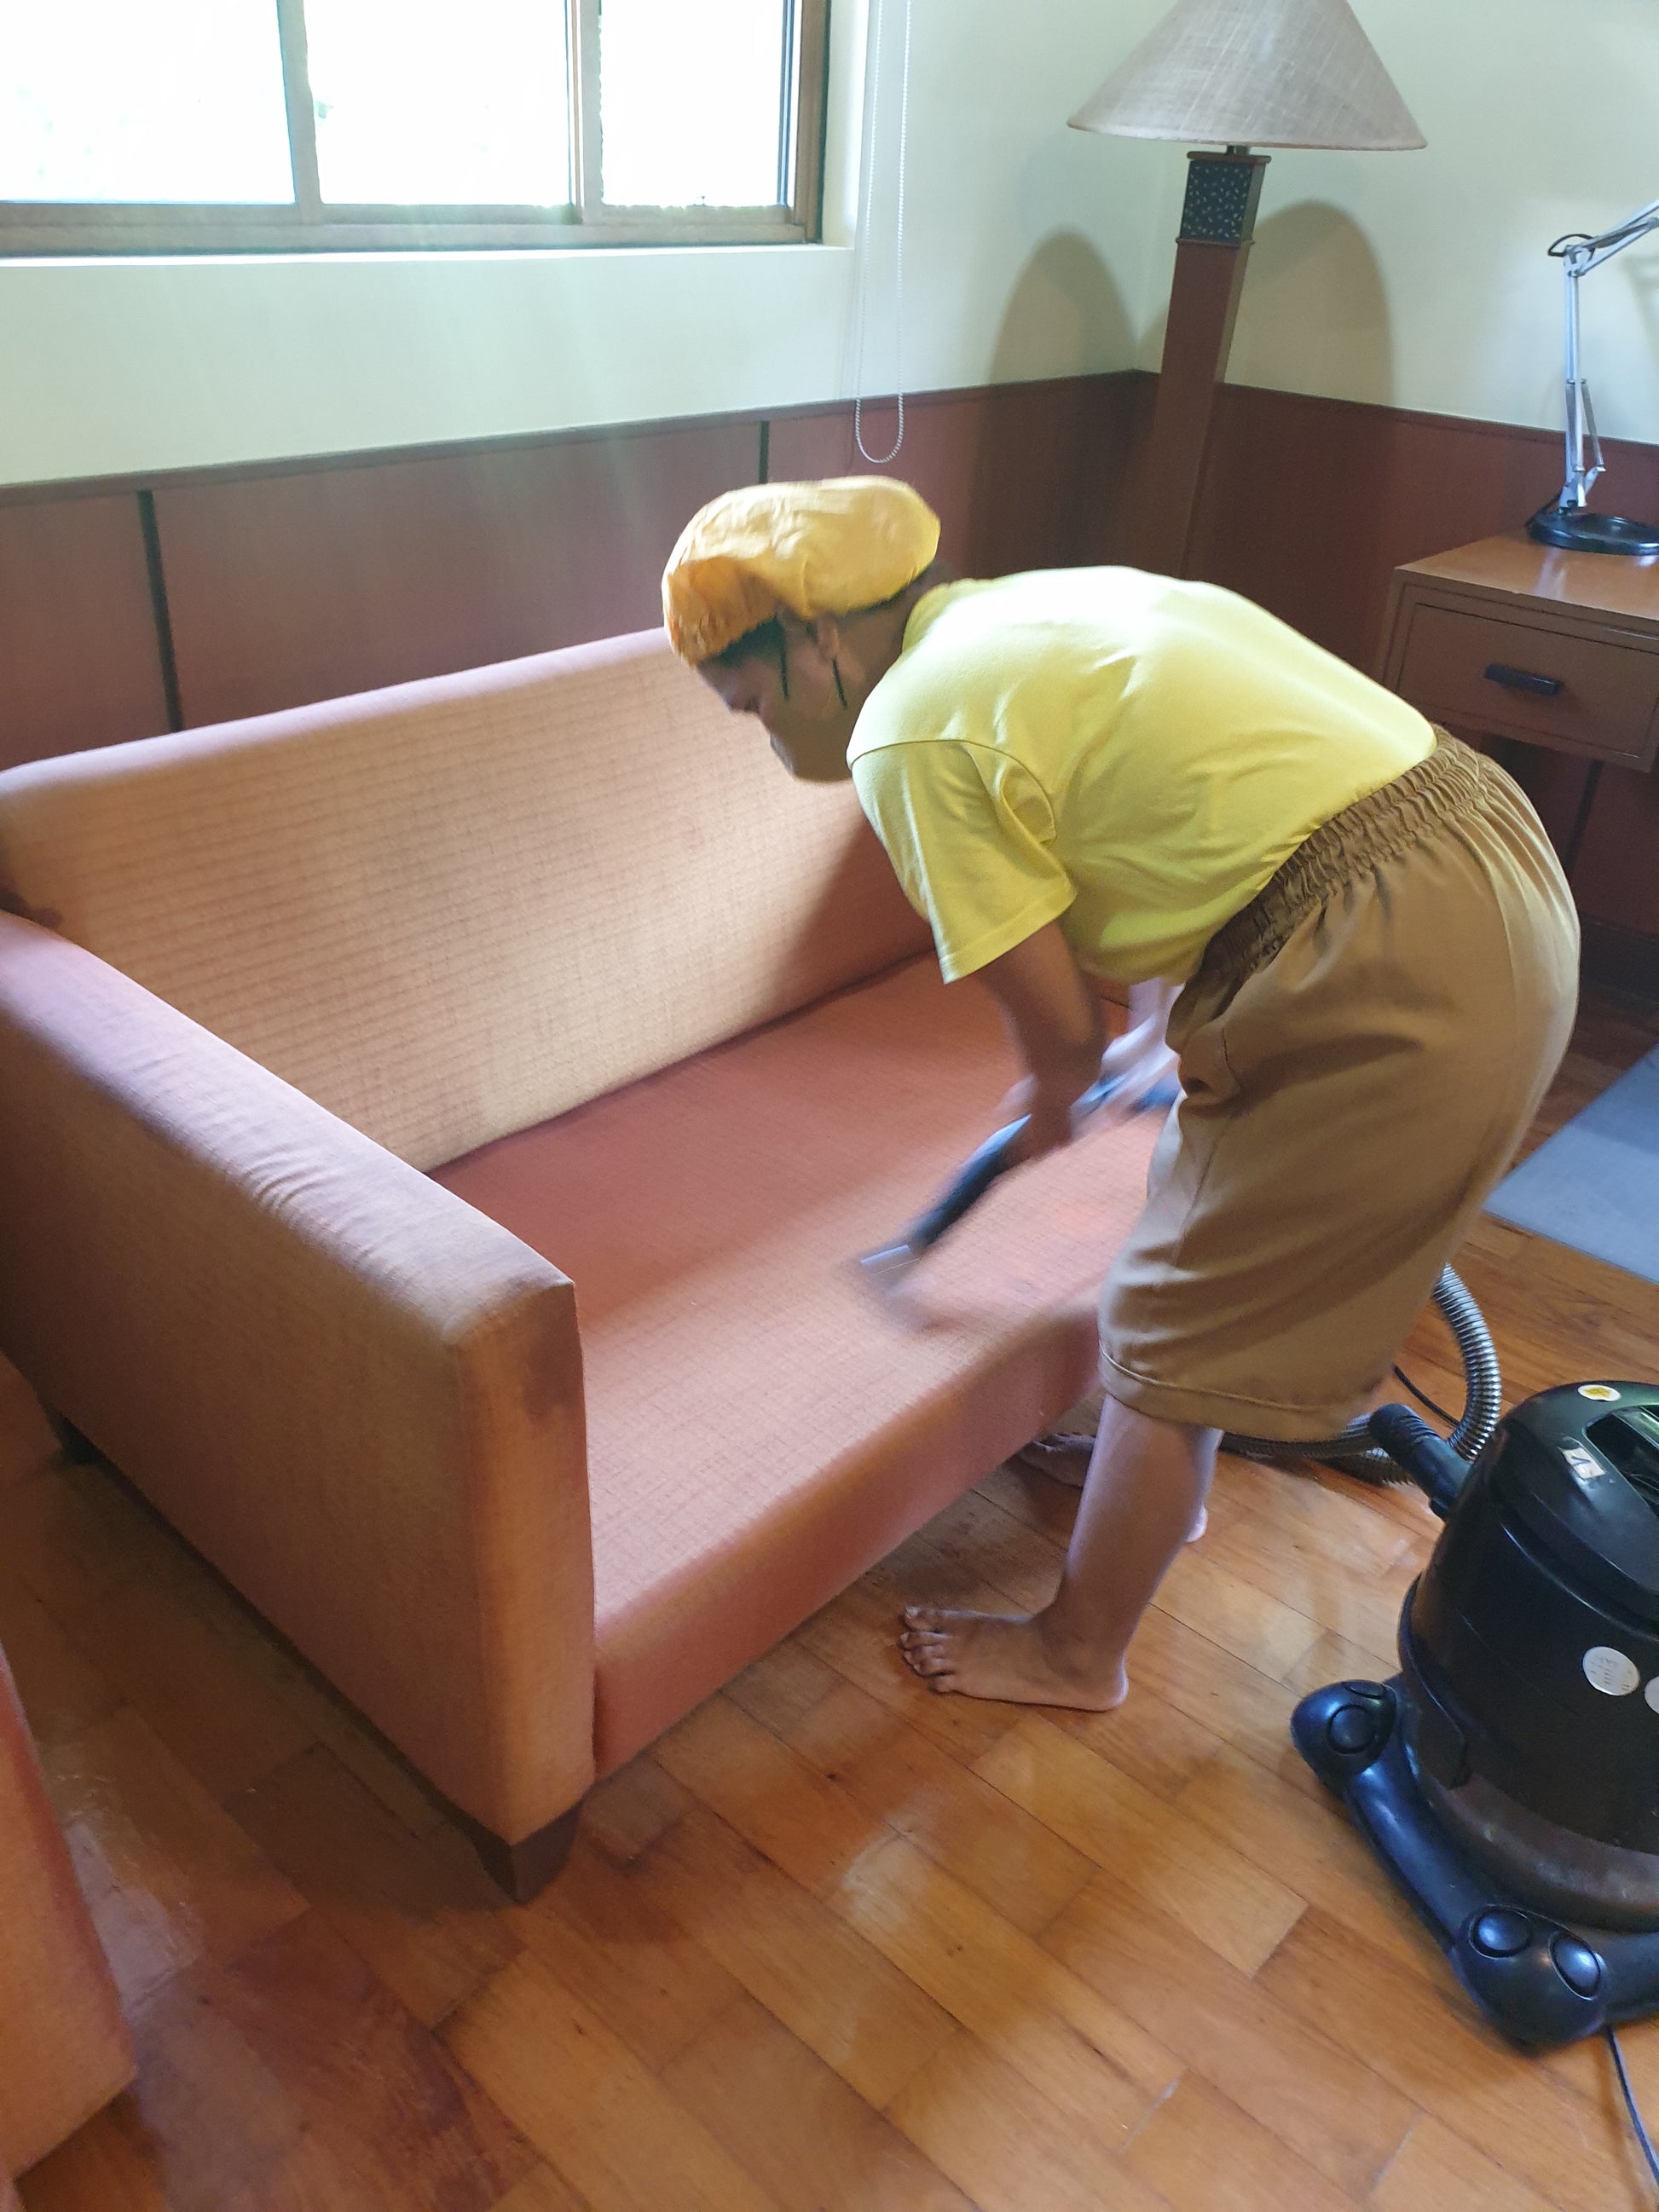 Upholstery Cleaning Sofa Bed Happy